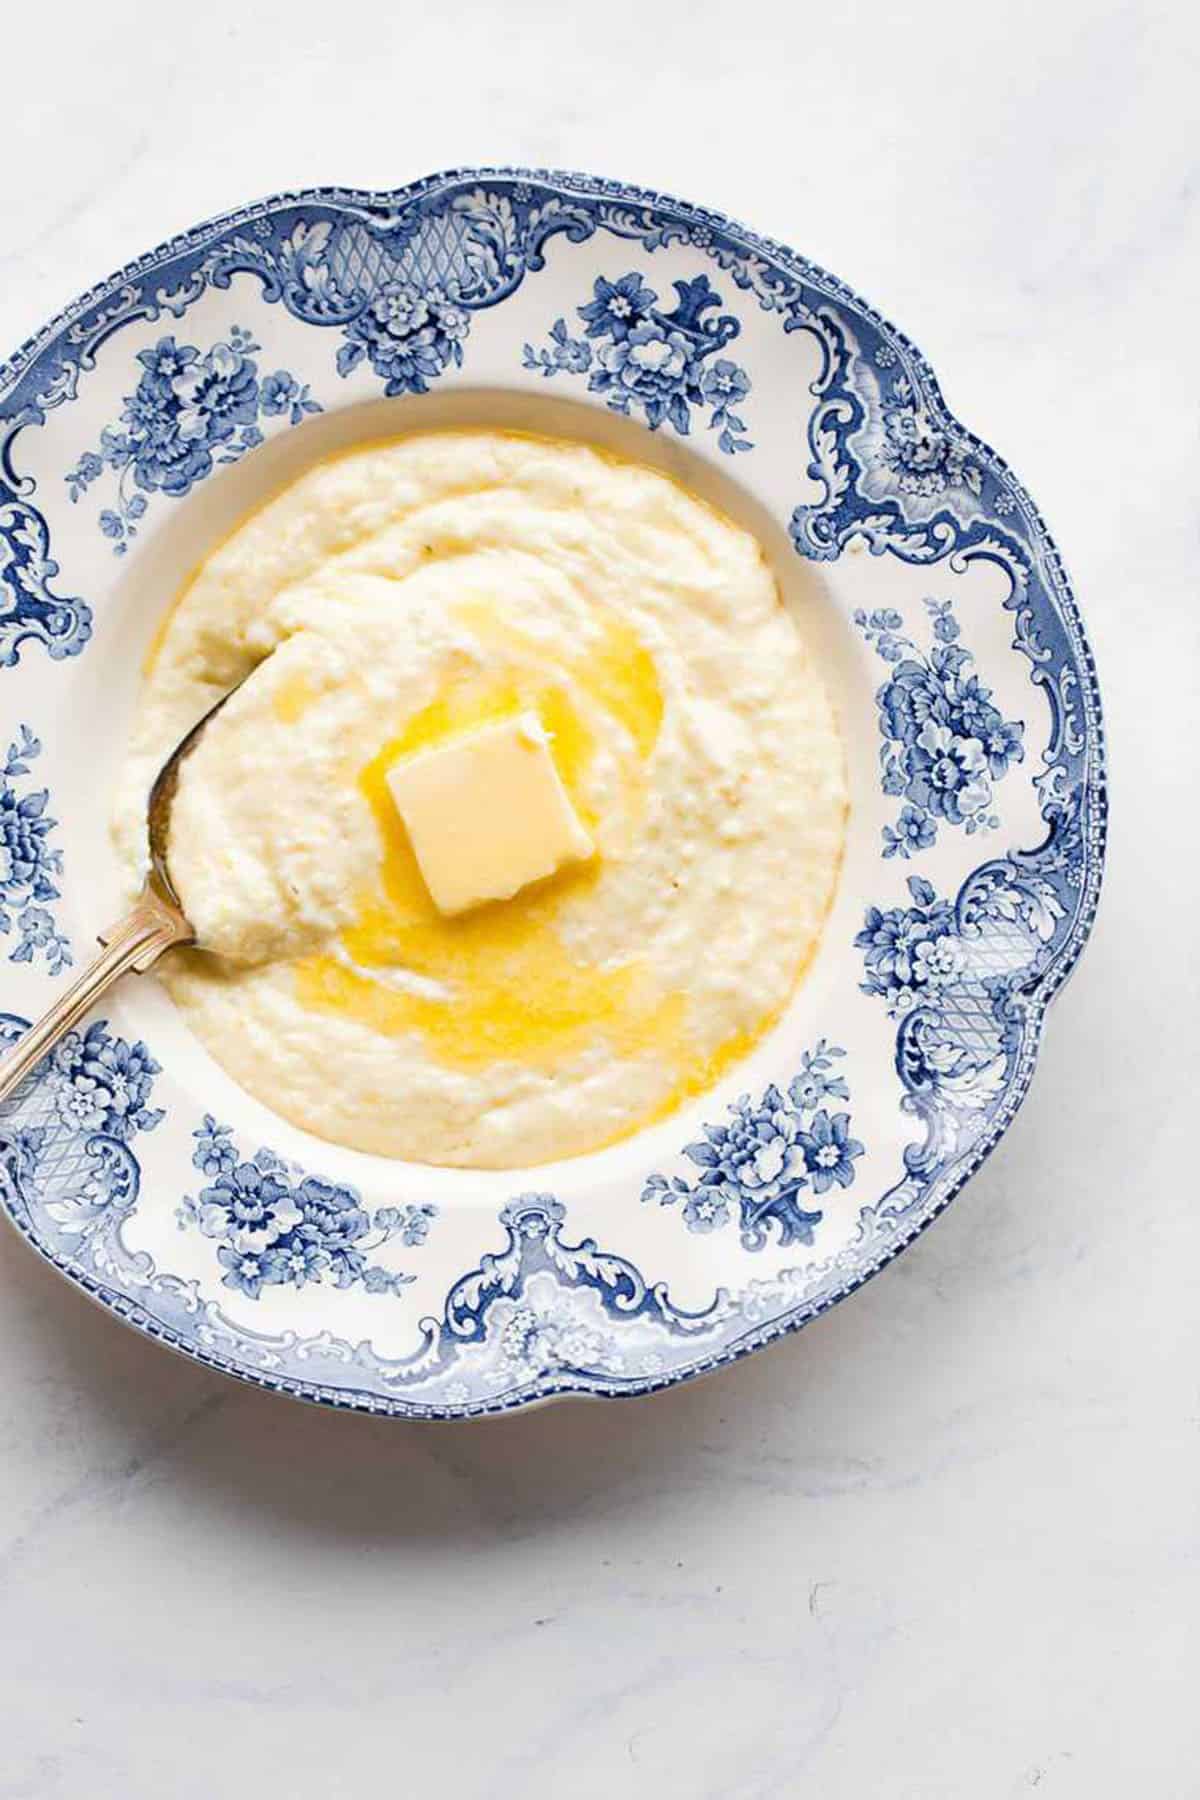 Homemade grits in a blue and white bowl on the table with a spoon in it and a pat of butter melting on top.